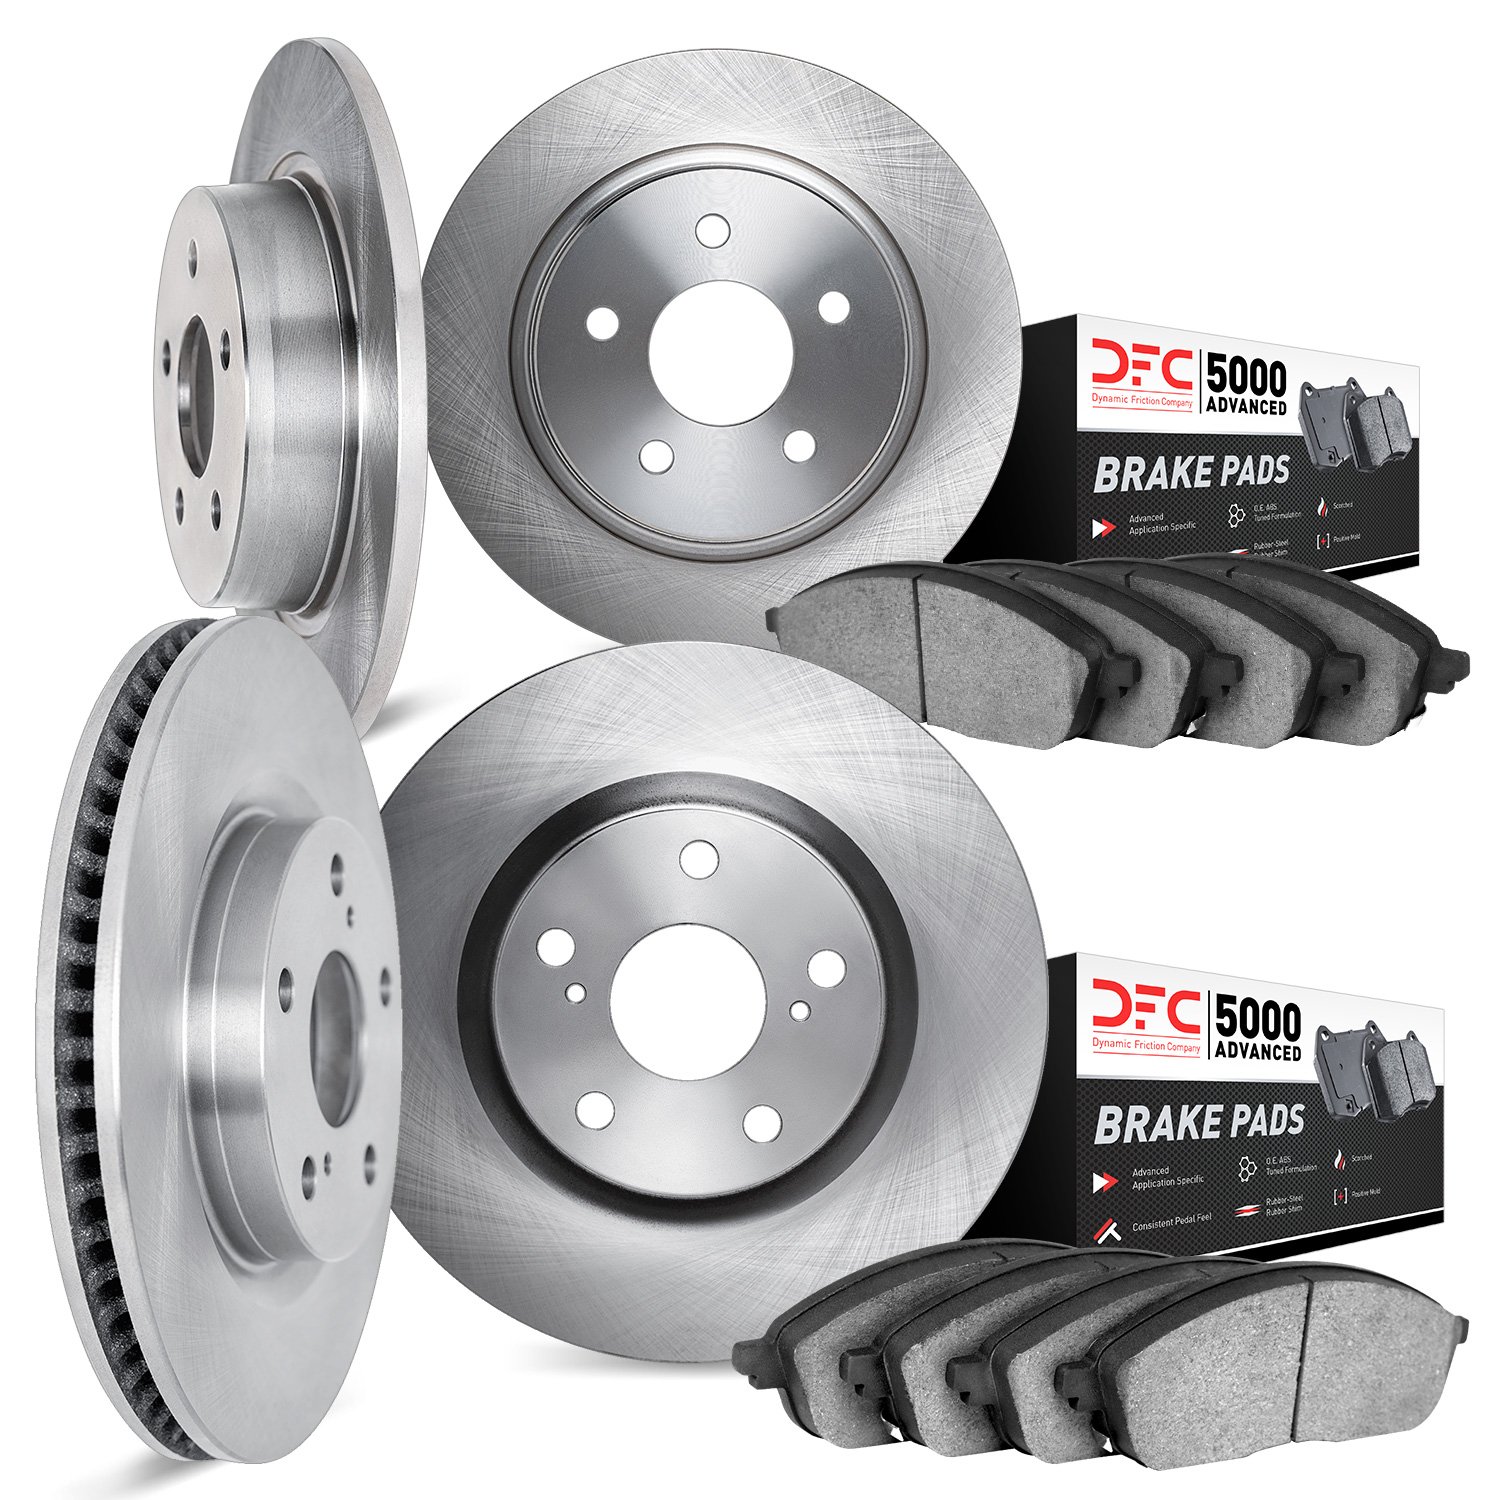 6504-76402 Brake Rotors w/5000 Advanced Brake Pads Kit, Fits Select Lexus/Toyota/Scion, Position: Front and Rear